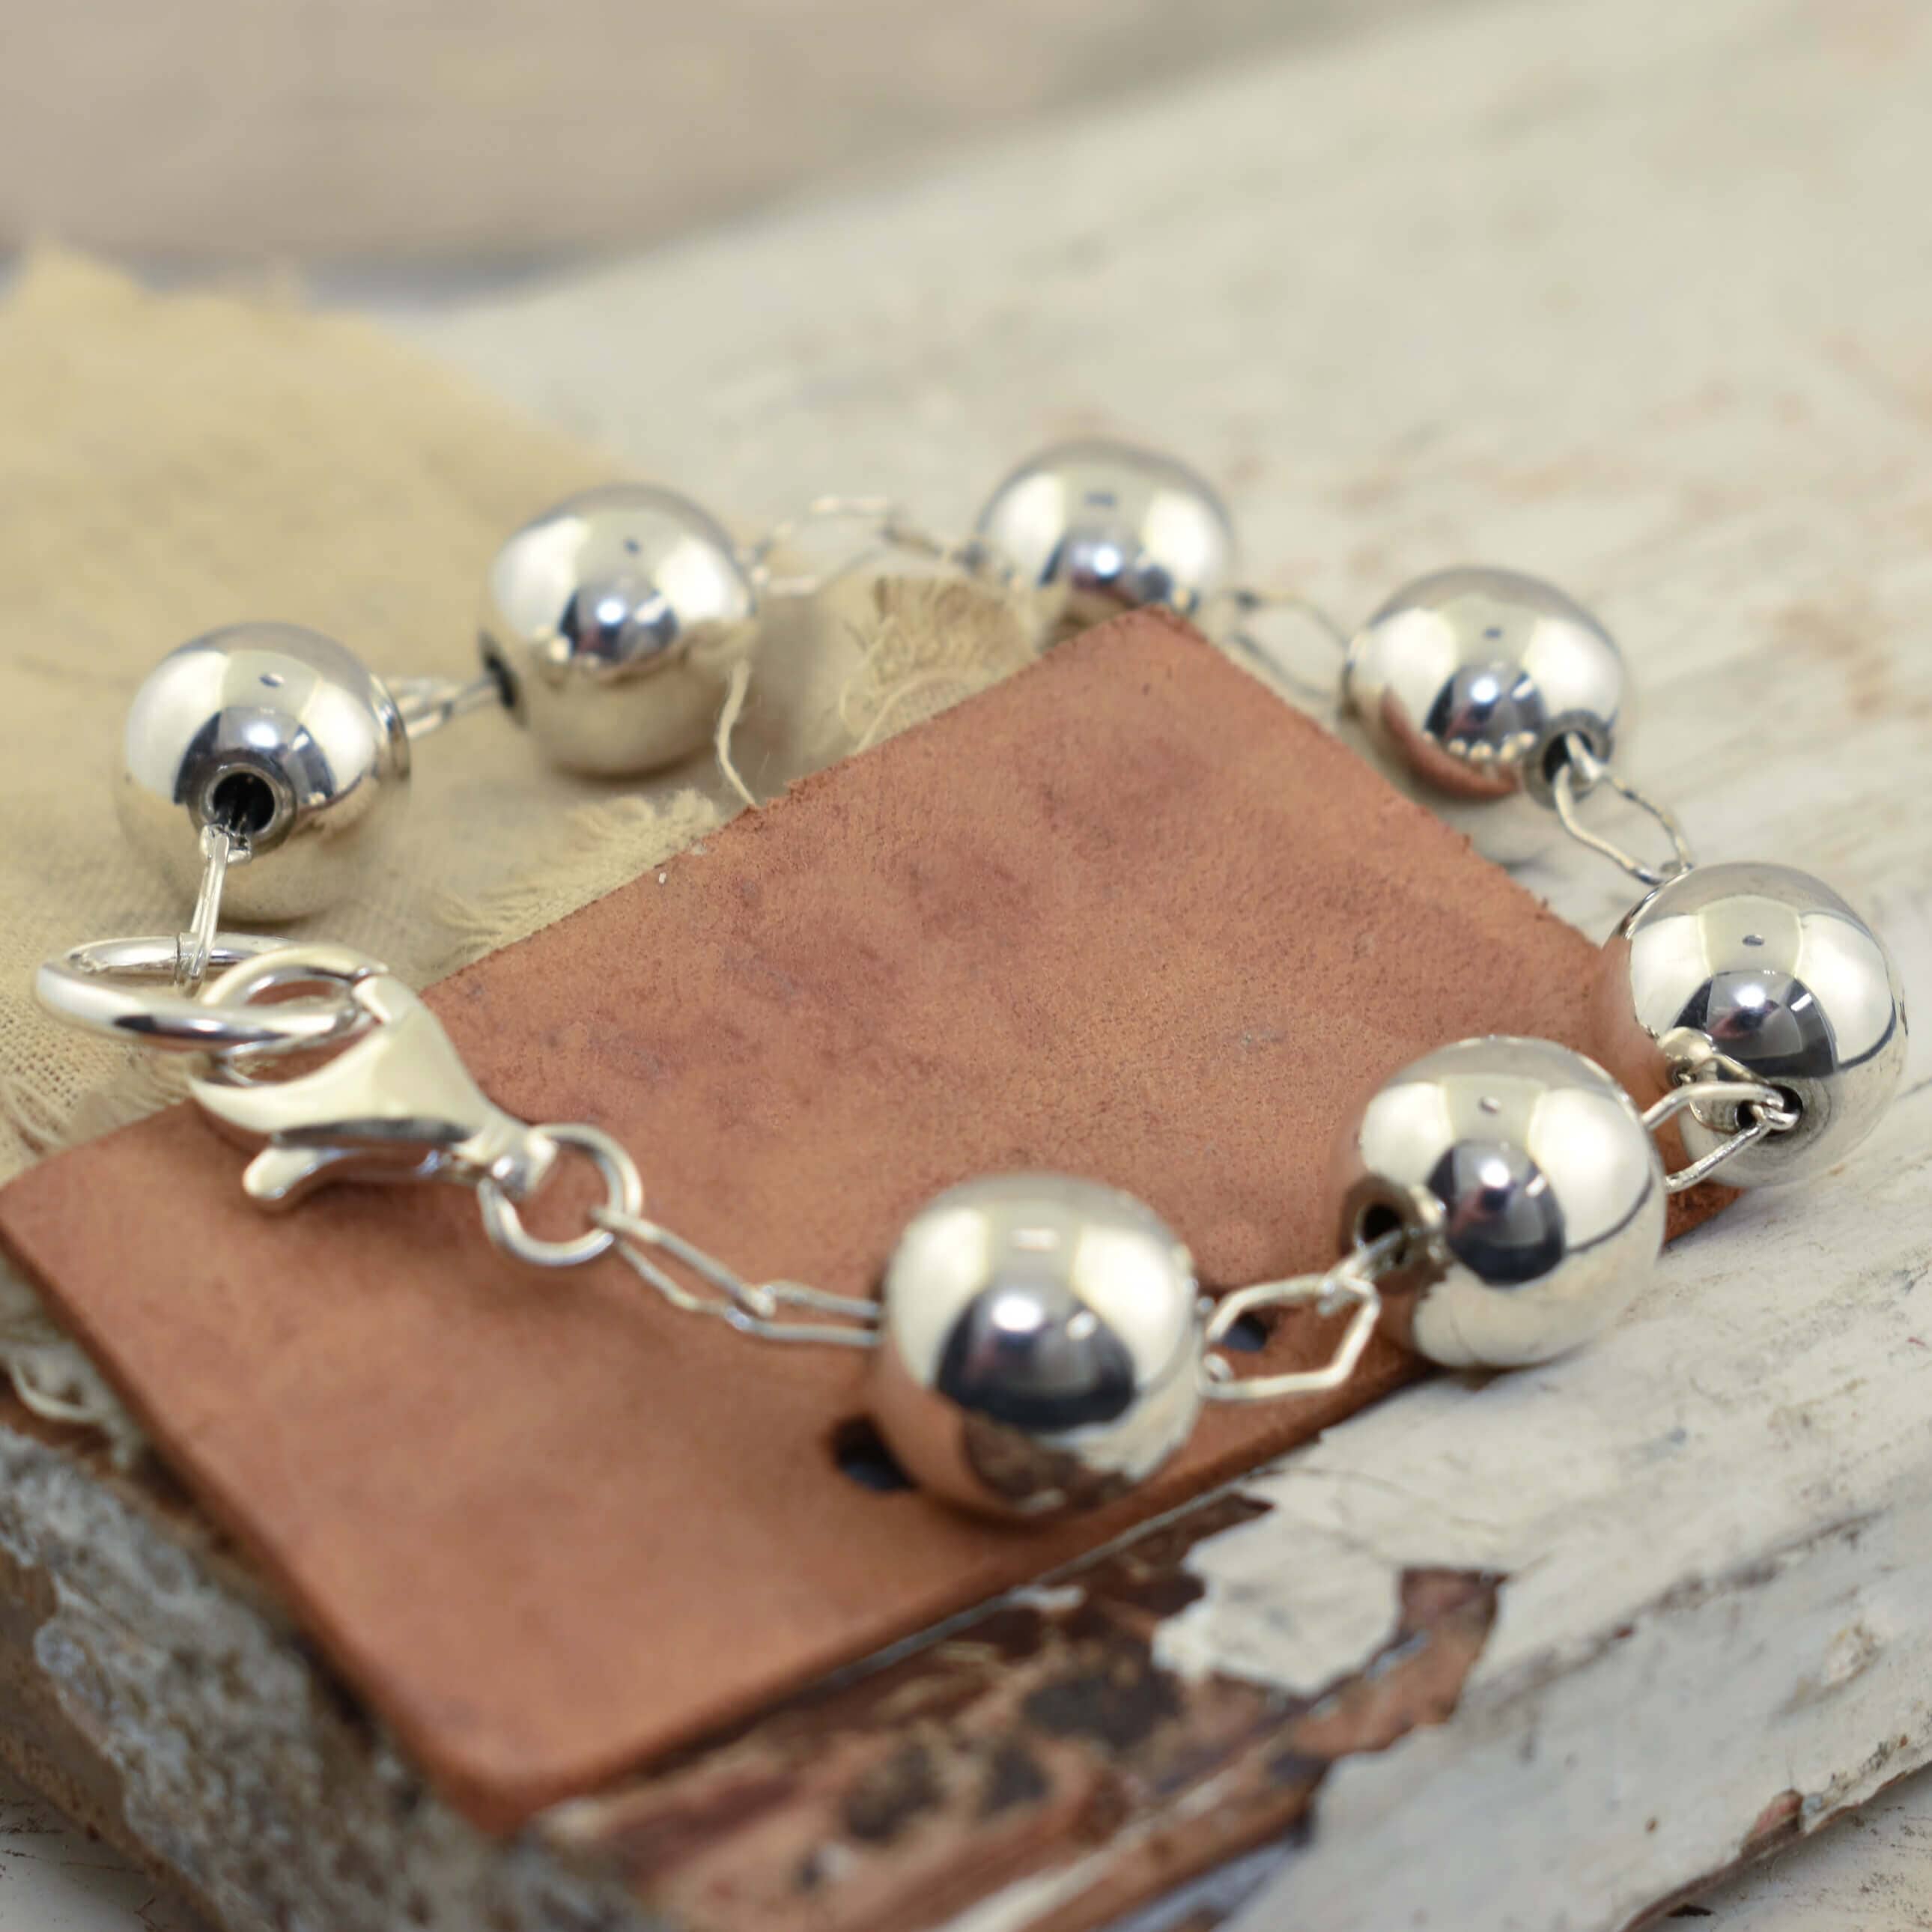 .925 sterling silver bracelet with large beads